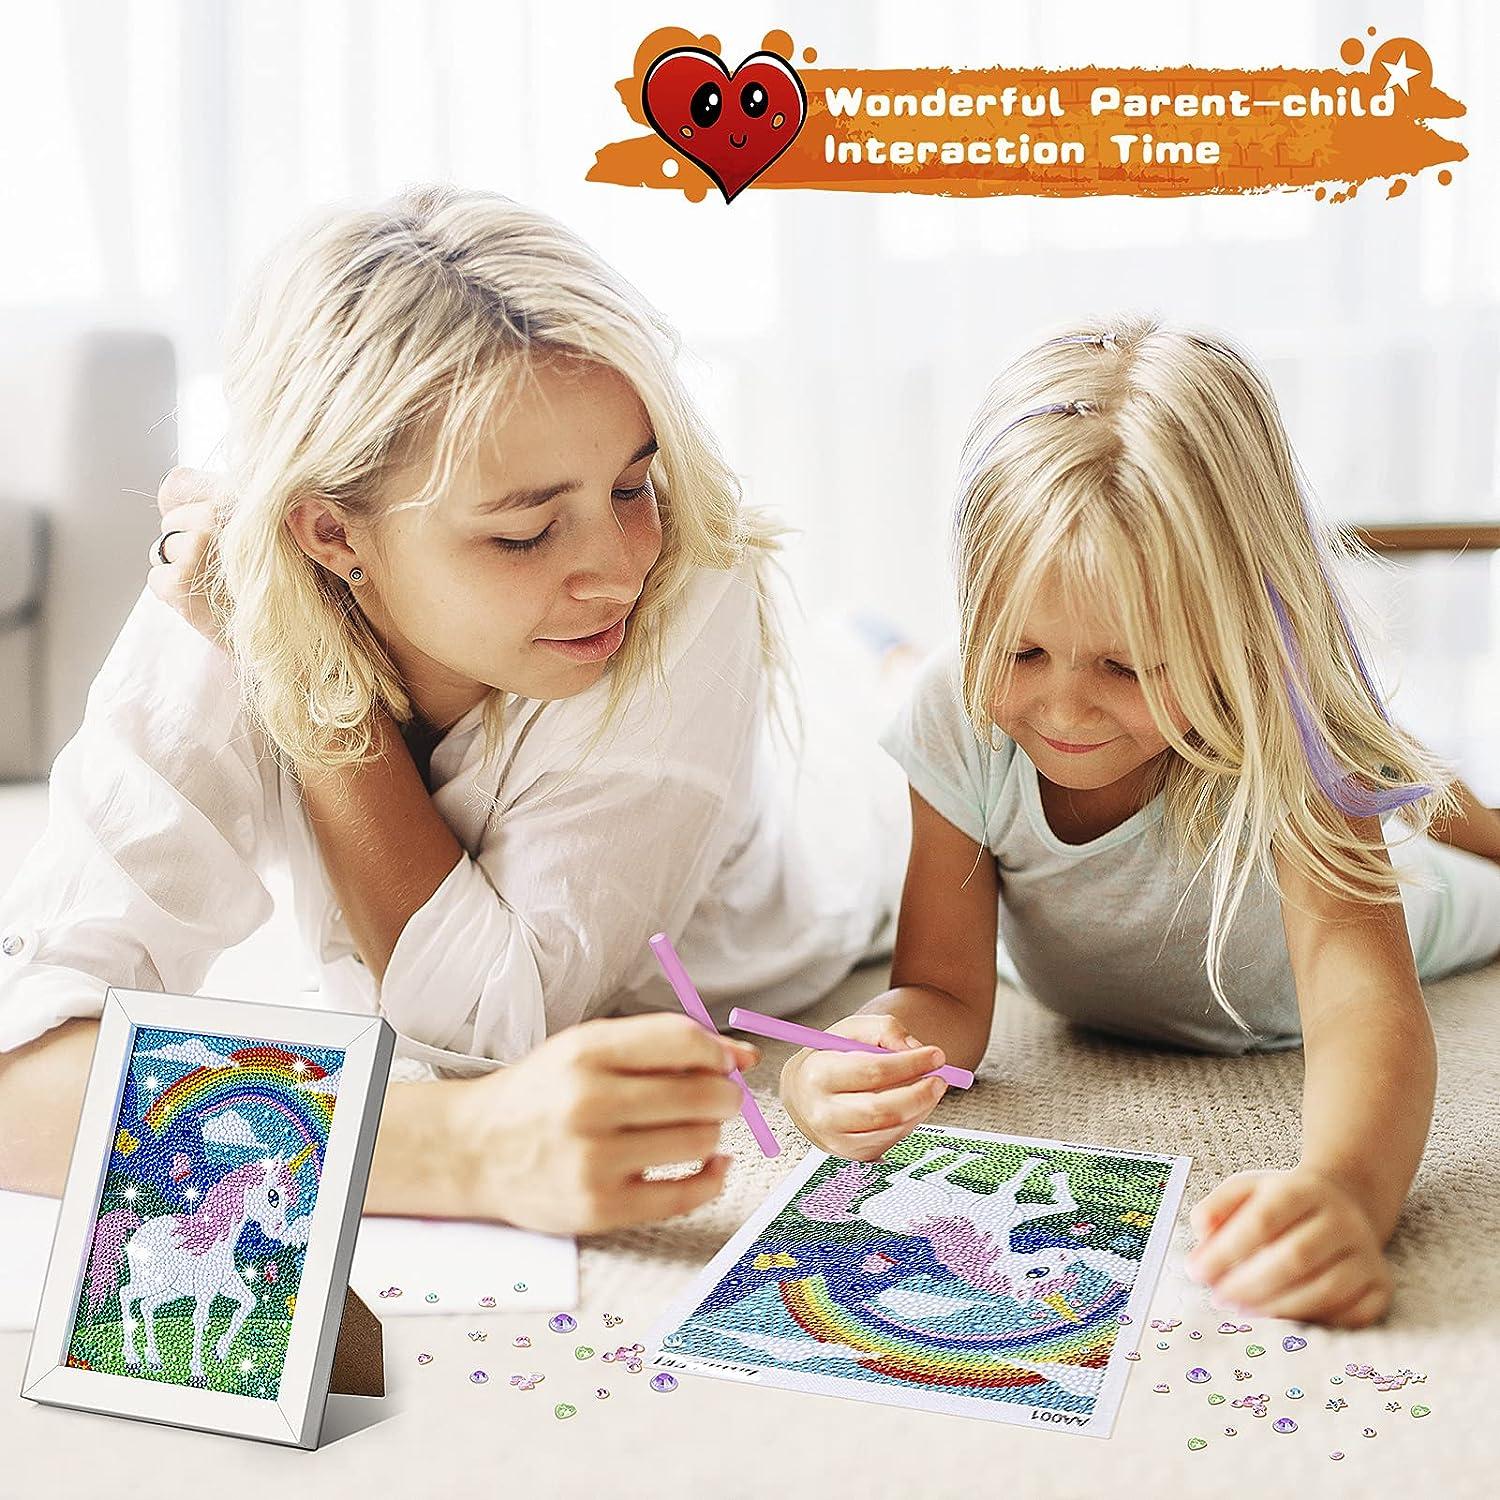 Diamond Painting Kit for Kids Age 6-12 Birthday Gifts for 7 8 9 10